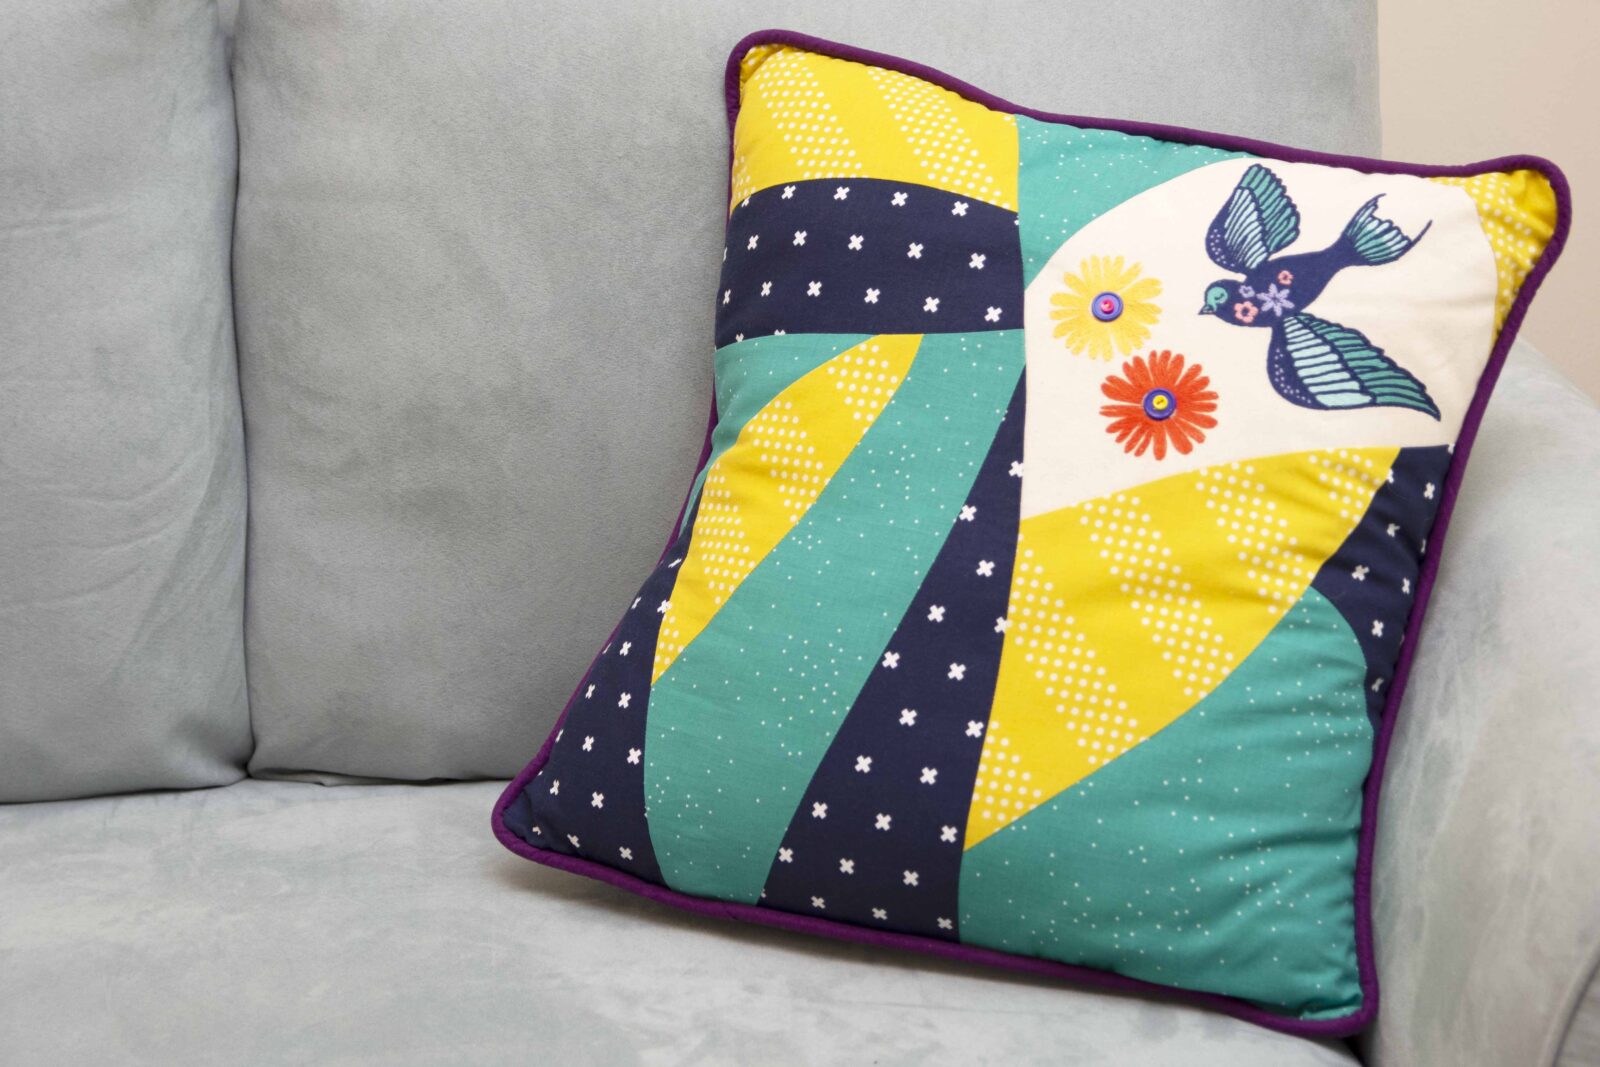 pieced pillow with embroidery